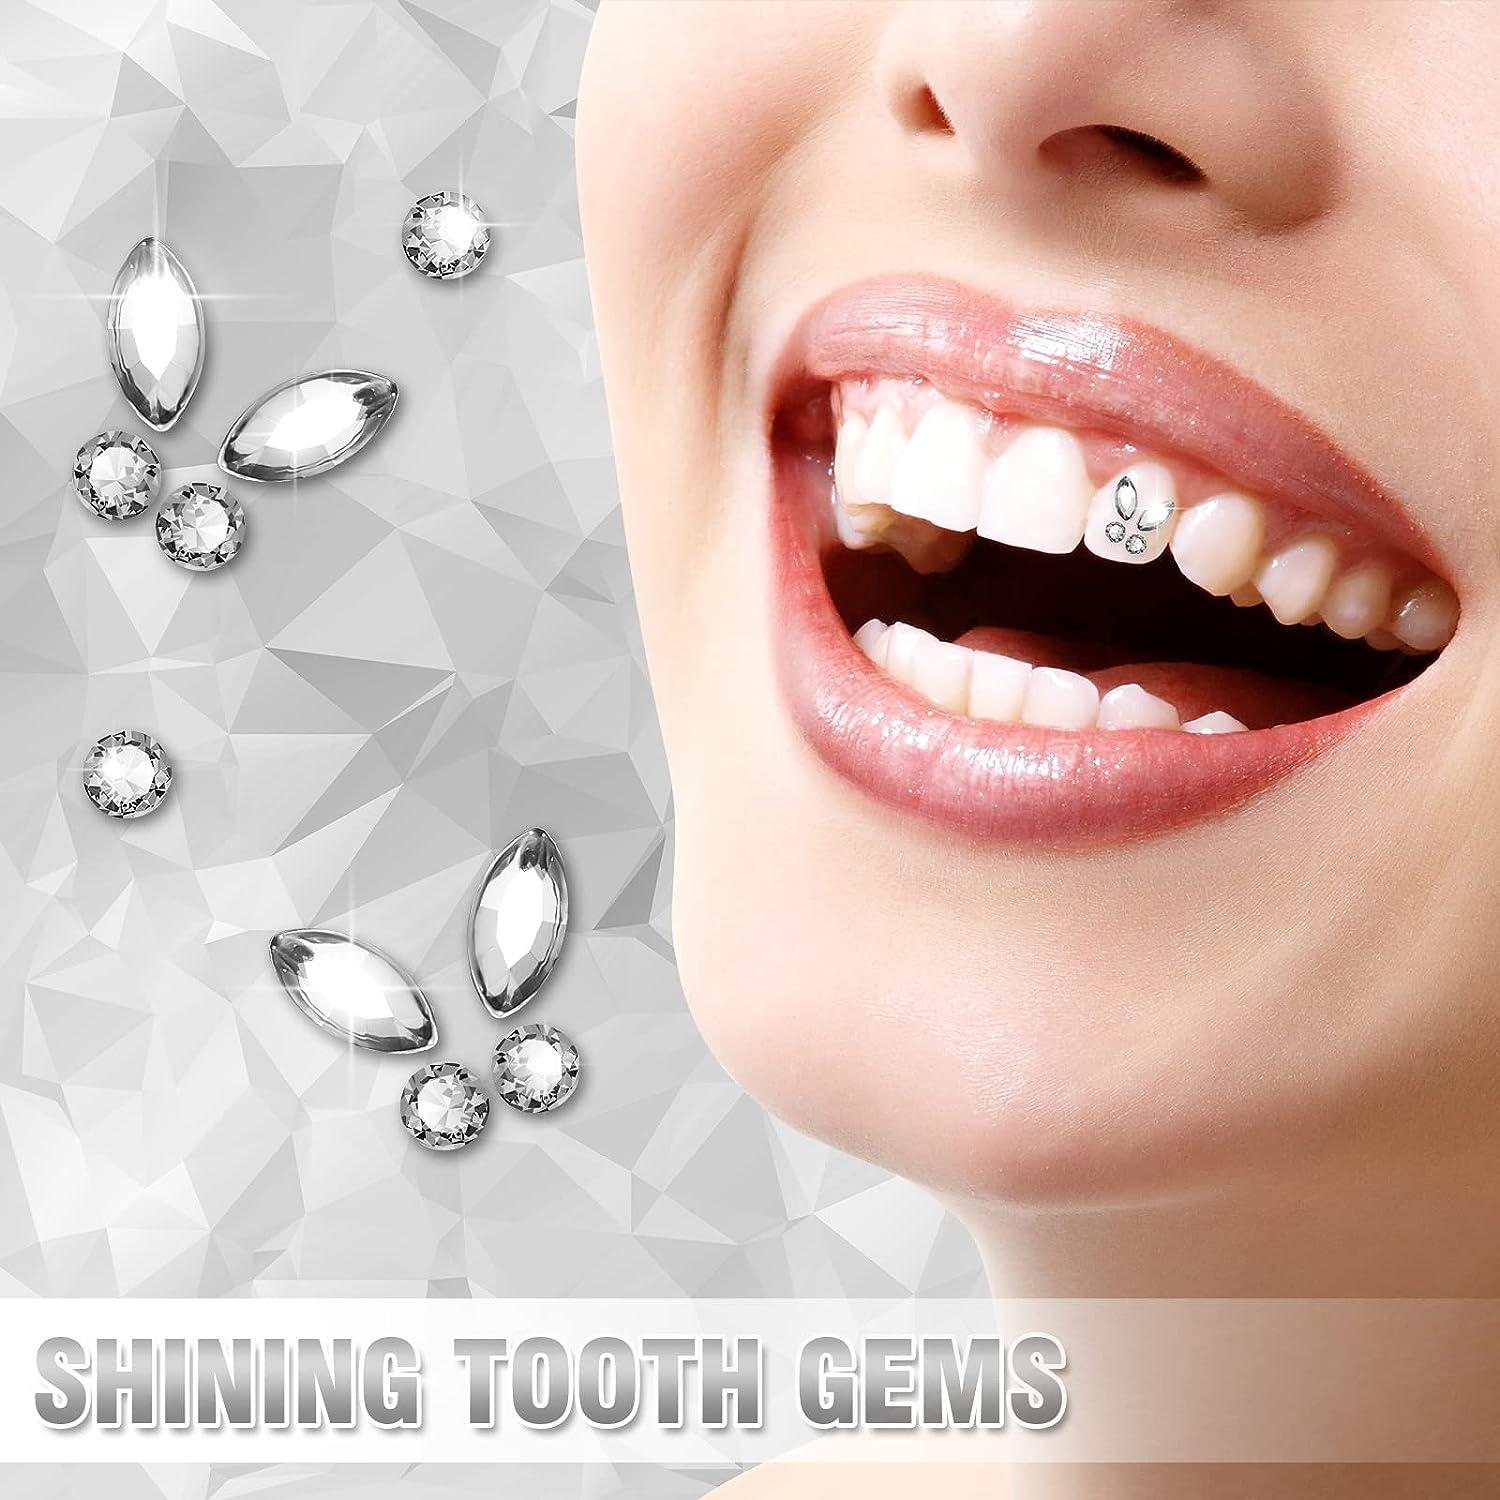 25 Pieces Tooth Gem Kit Tooth Jewelry Kit Fashionable Removable Tooth  Ornaments Artificial Crystal Tooth Ornaments